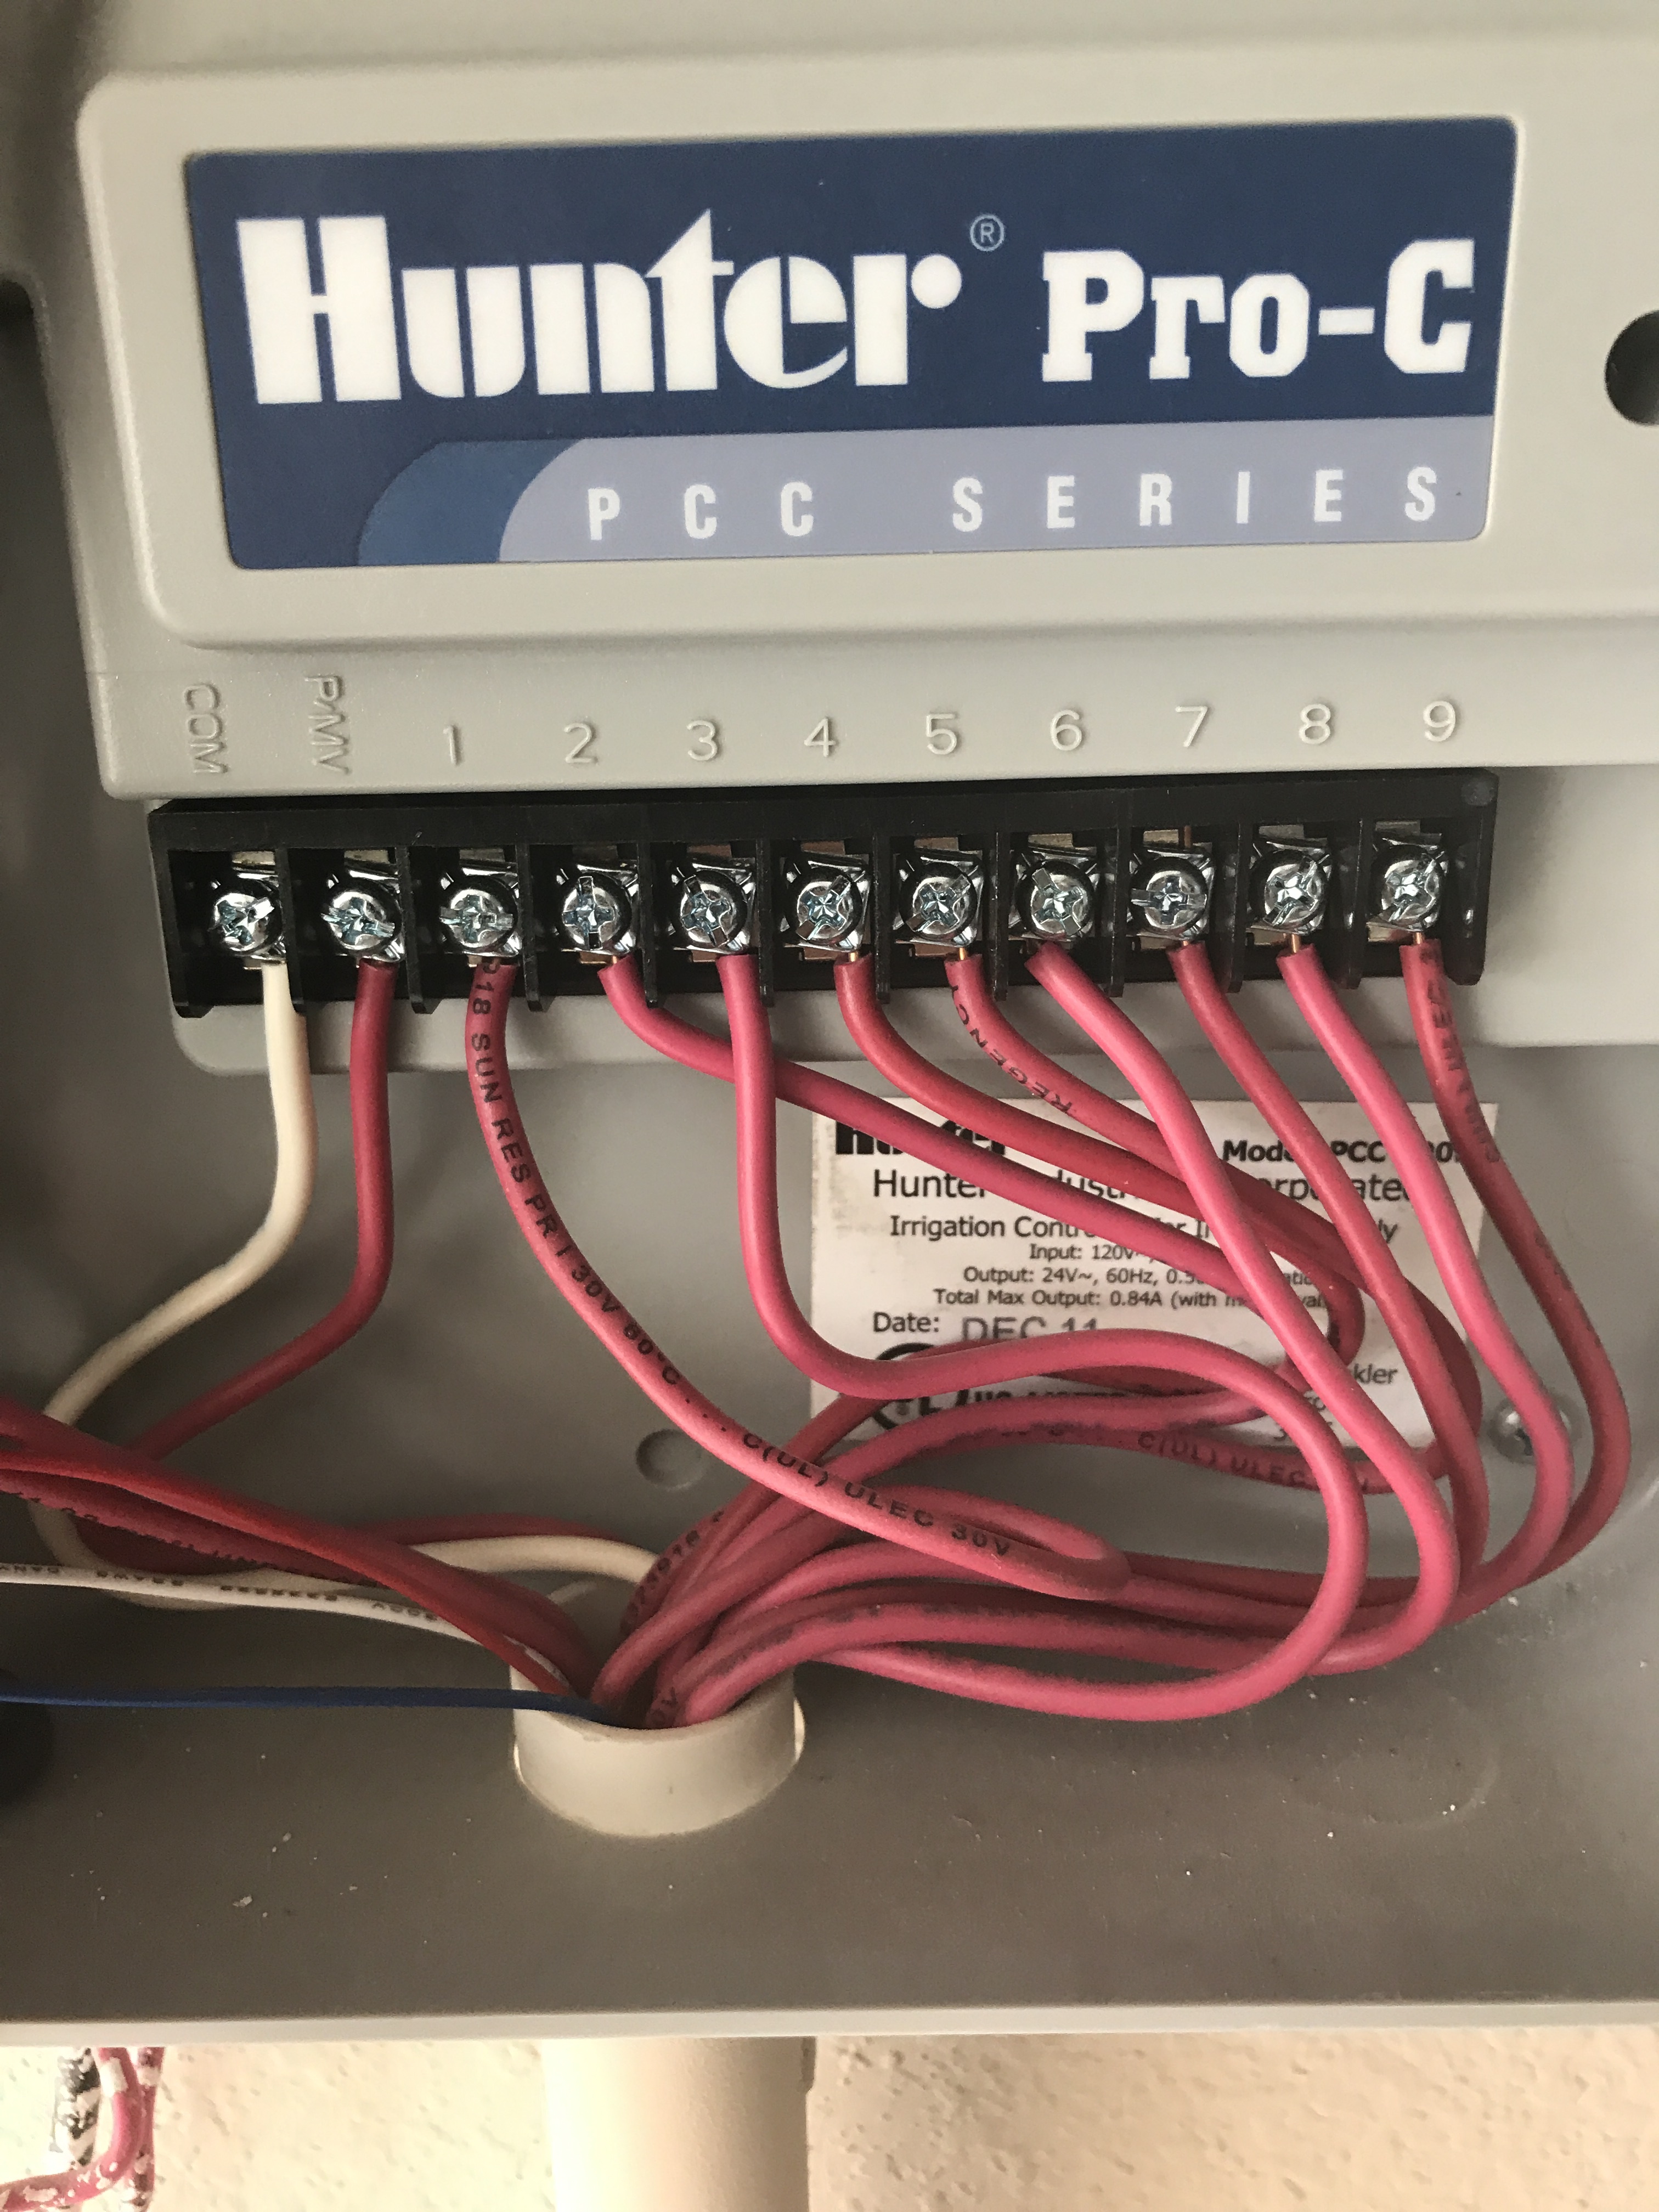 Hunter Pro-C to Gen 2 - Wiring issues - Archive - Rachio Community